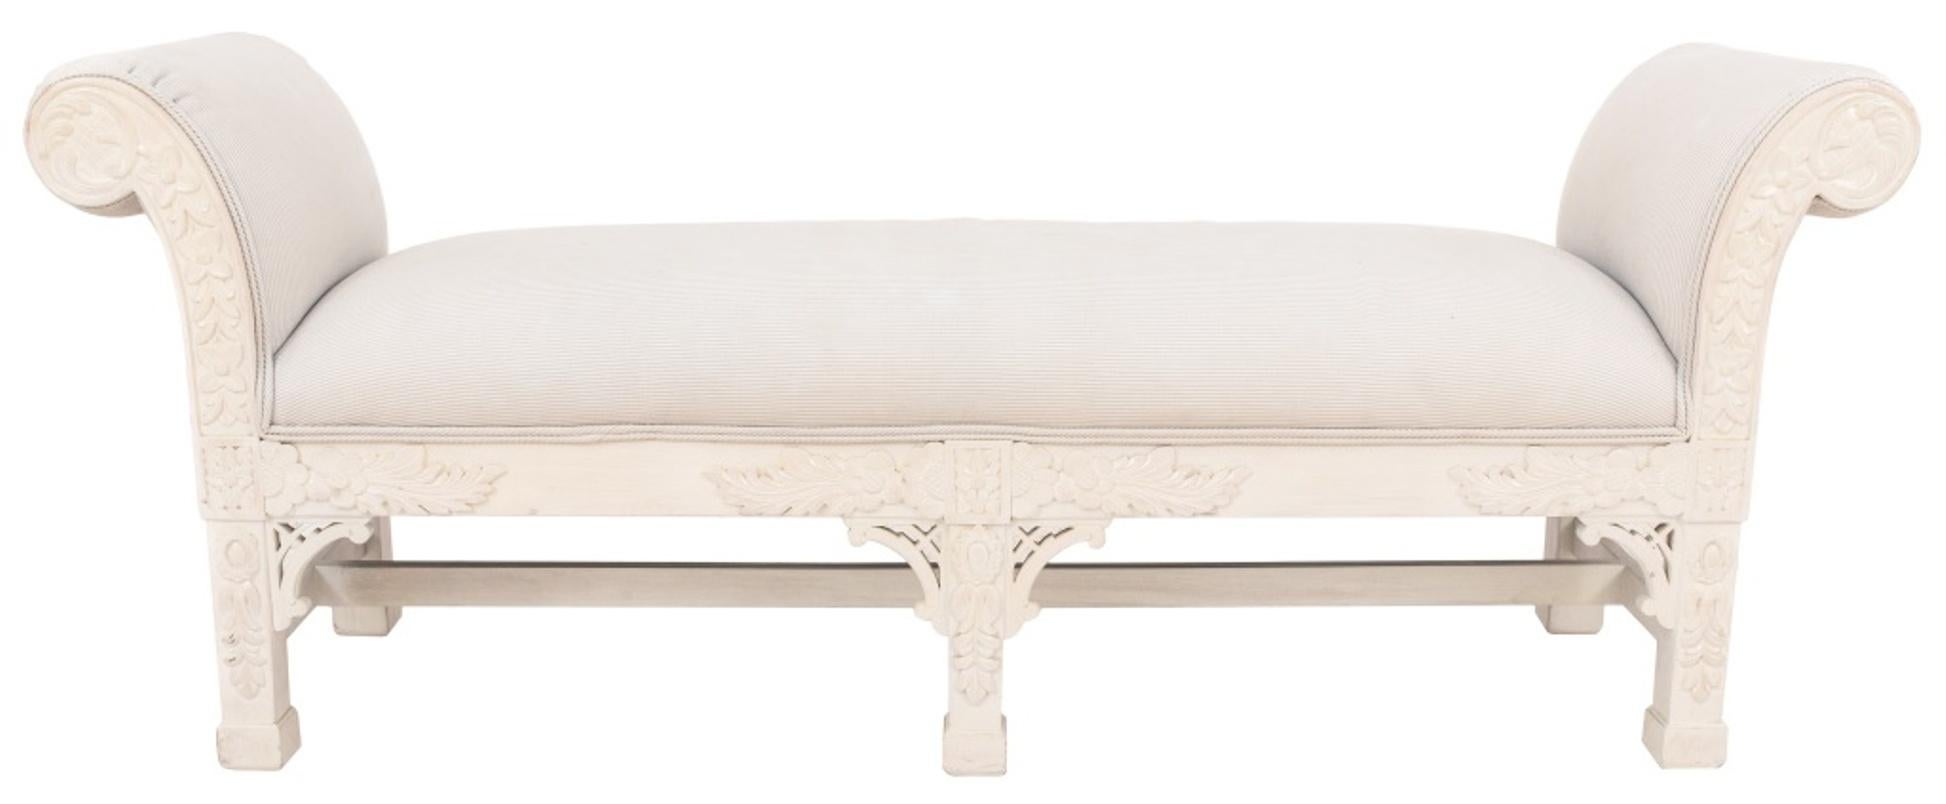 Colonial style white painted carved wood with floral motif upholstered bench, having scrolled armrests. Measures: 24